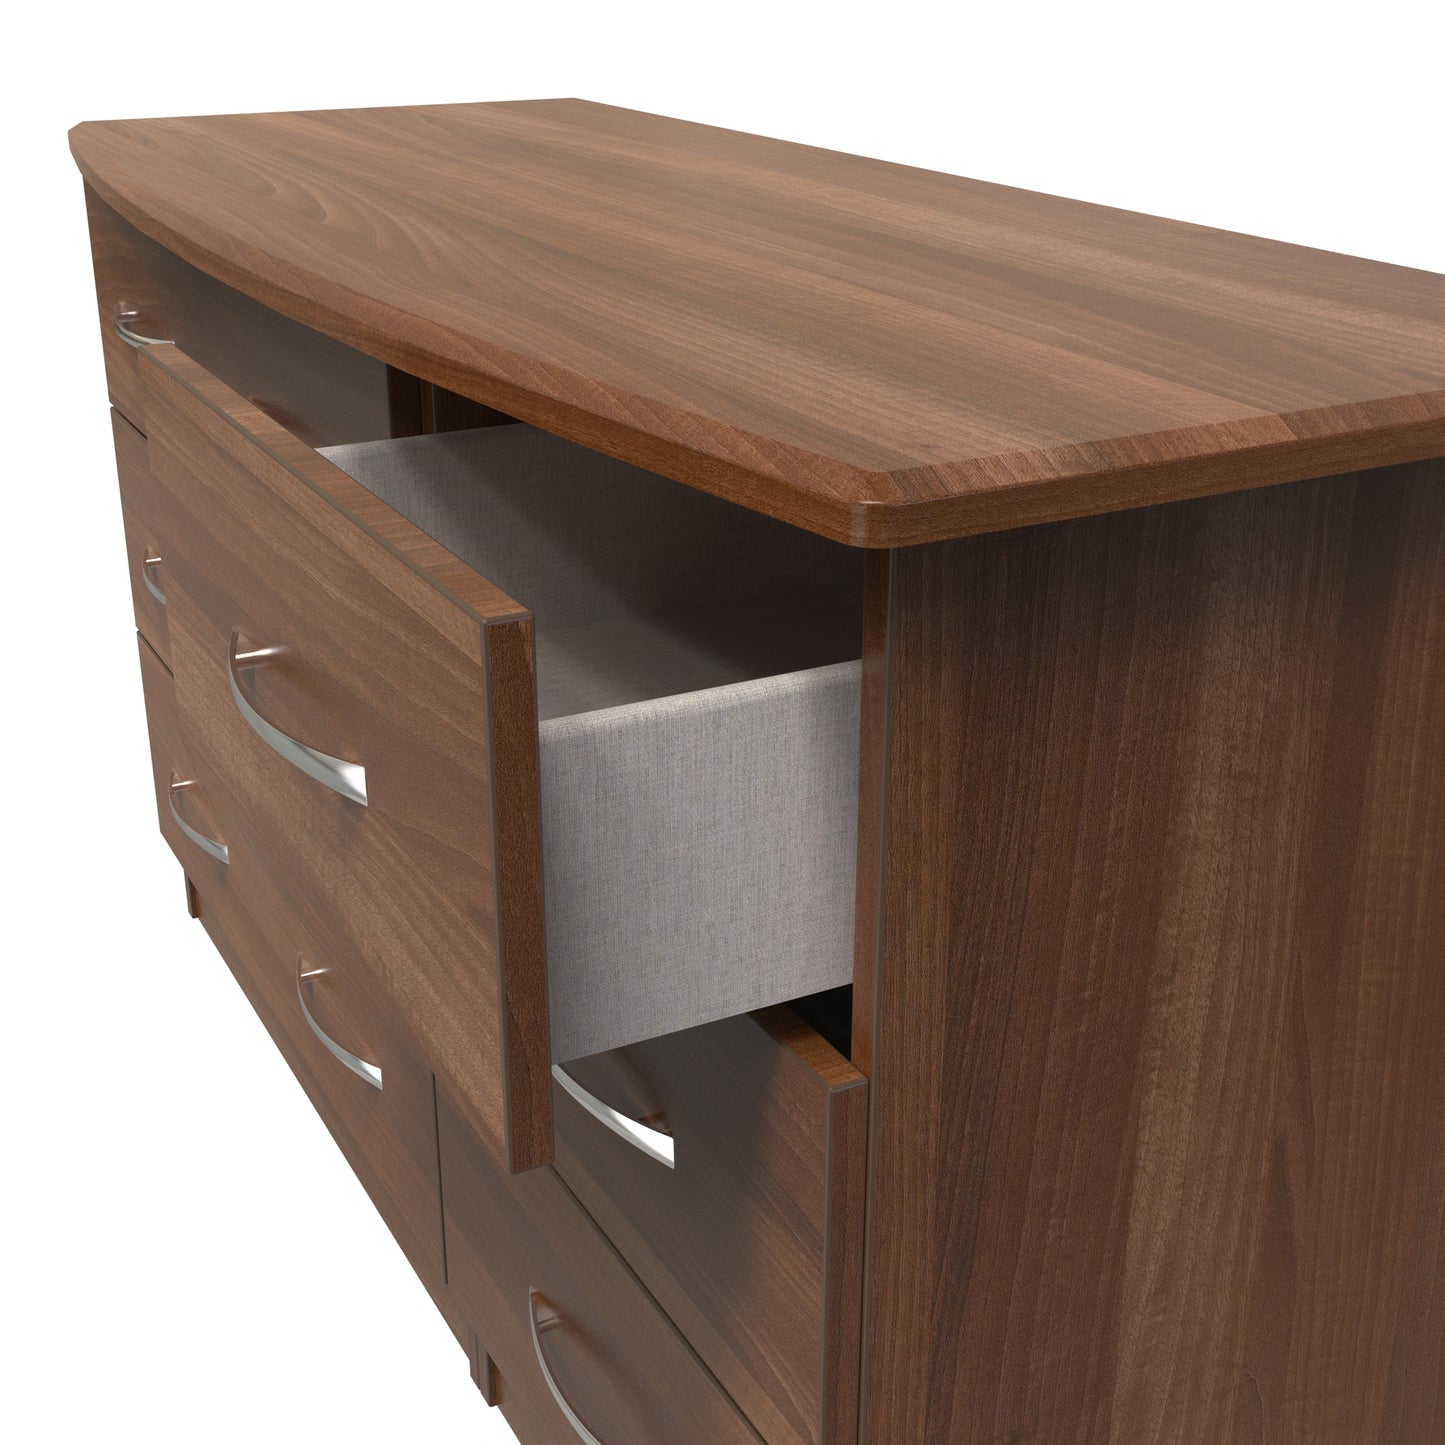 Eve 6 Drawer Wide Chest: Care Home Range